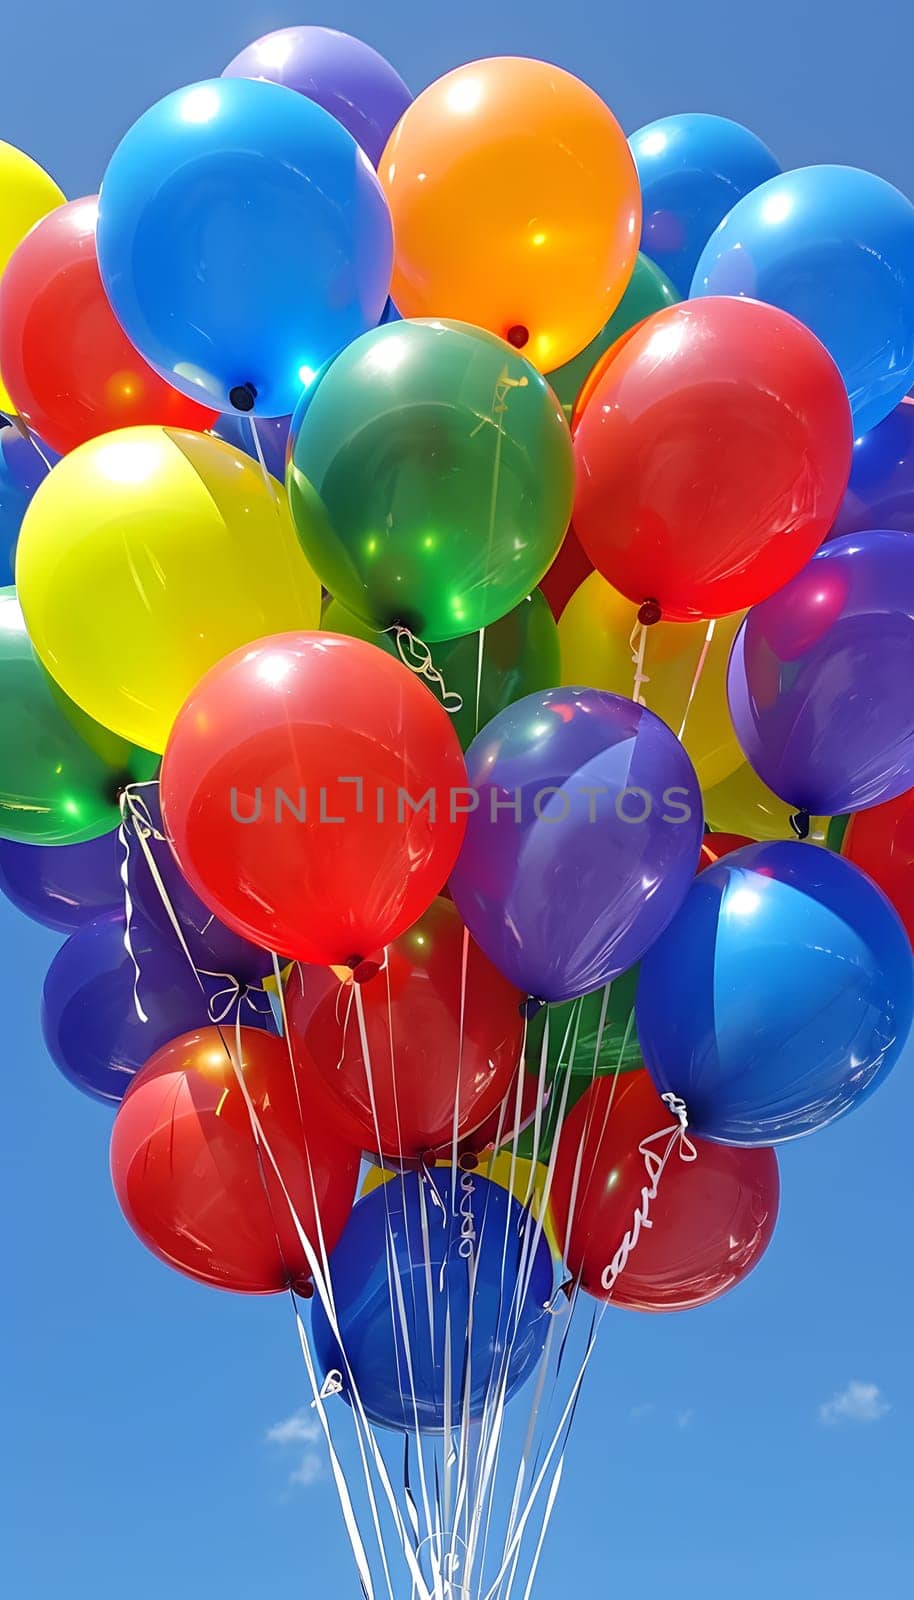 A collection of vibrant balloons floating against a light azure sky, adding pops of pink, red, and magenta to the natural environment like colorful toys in the sky